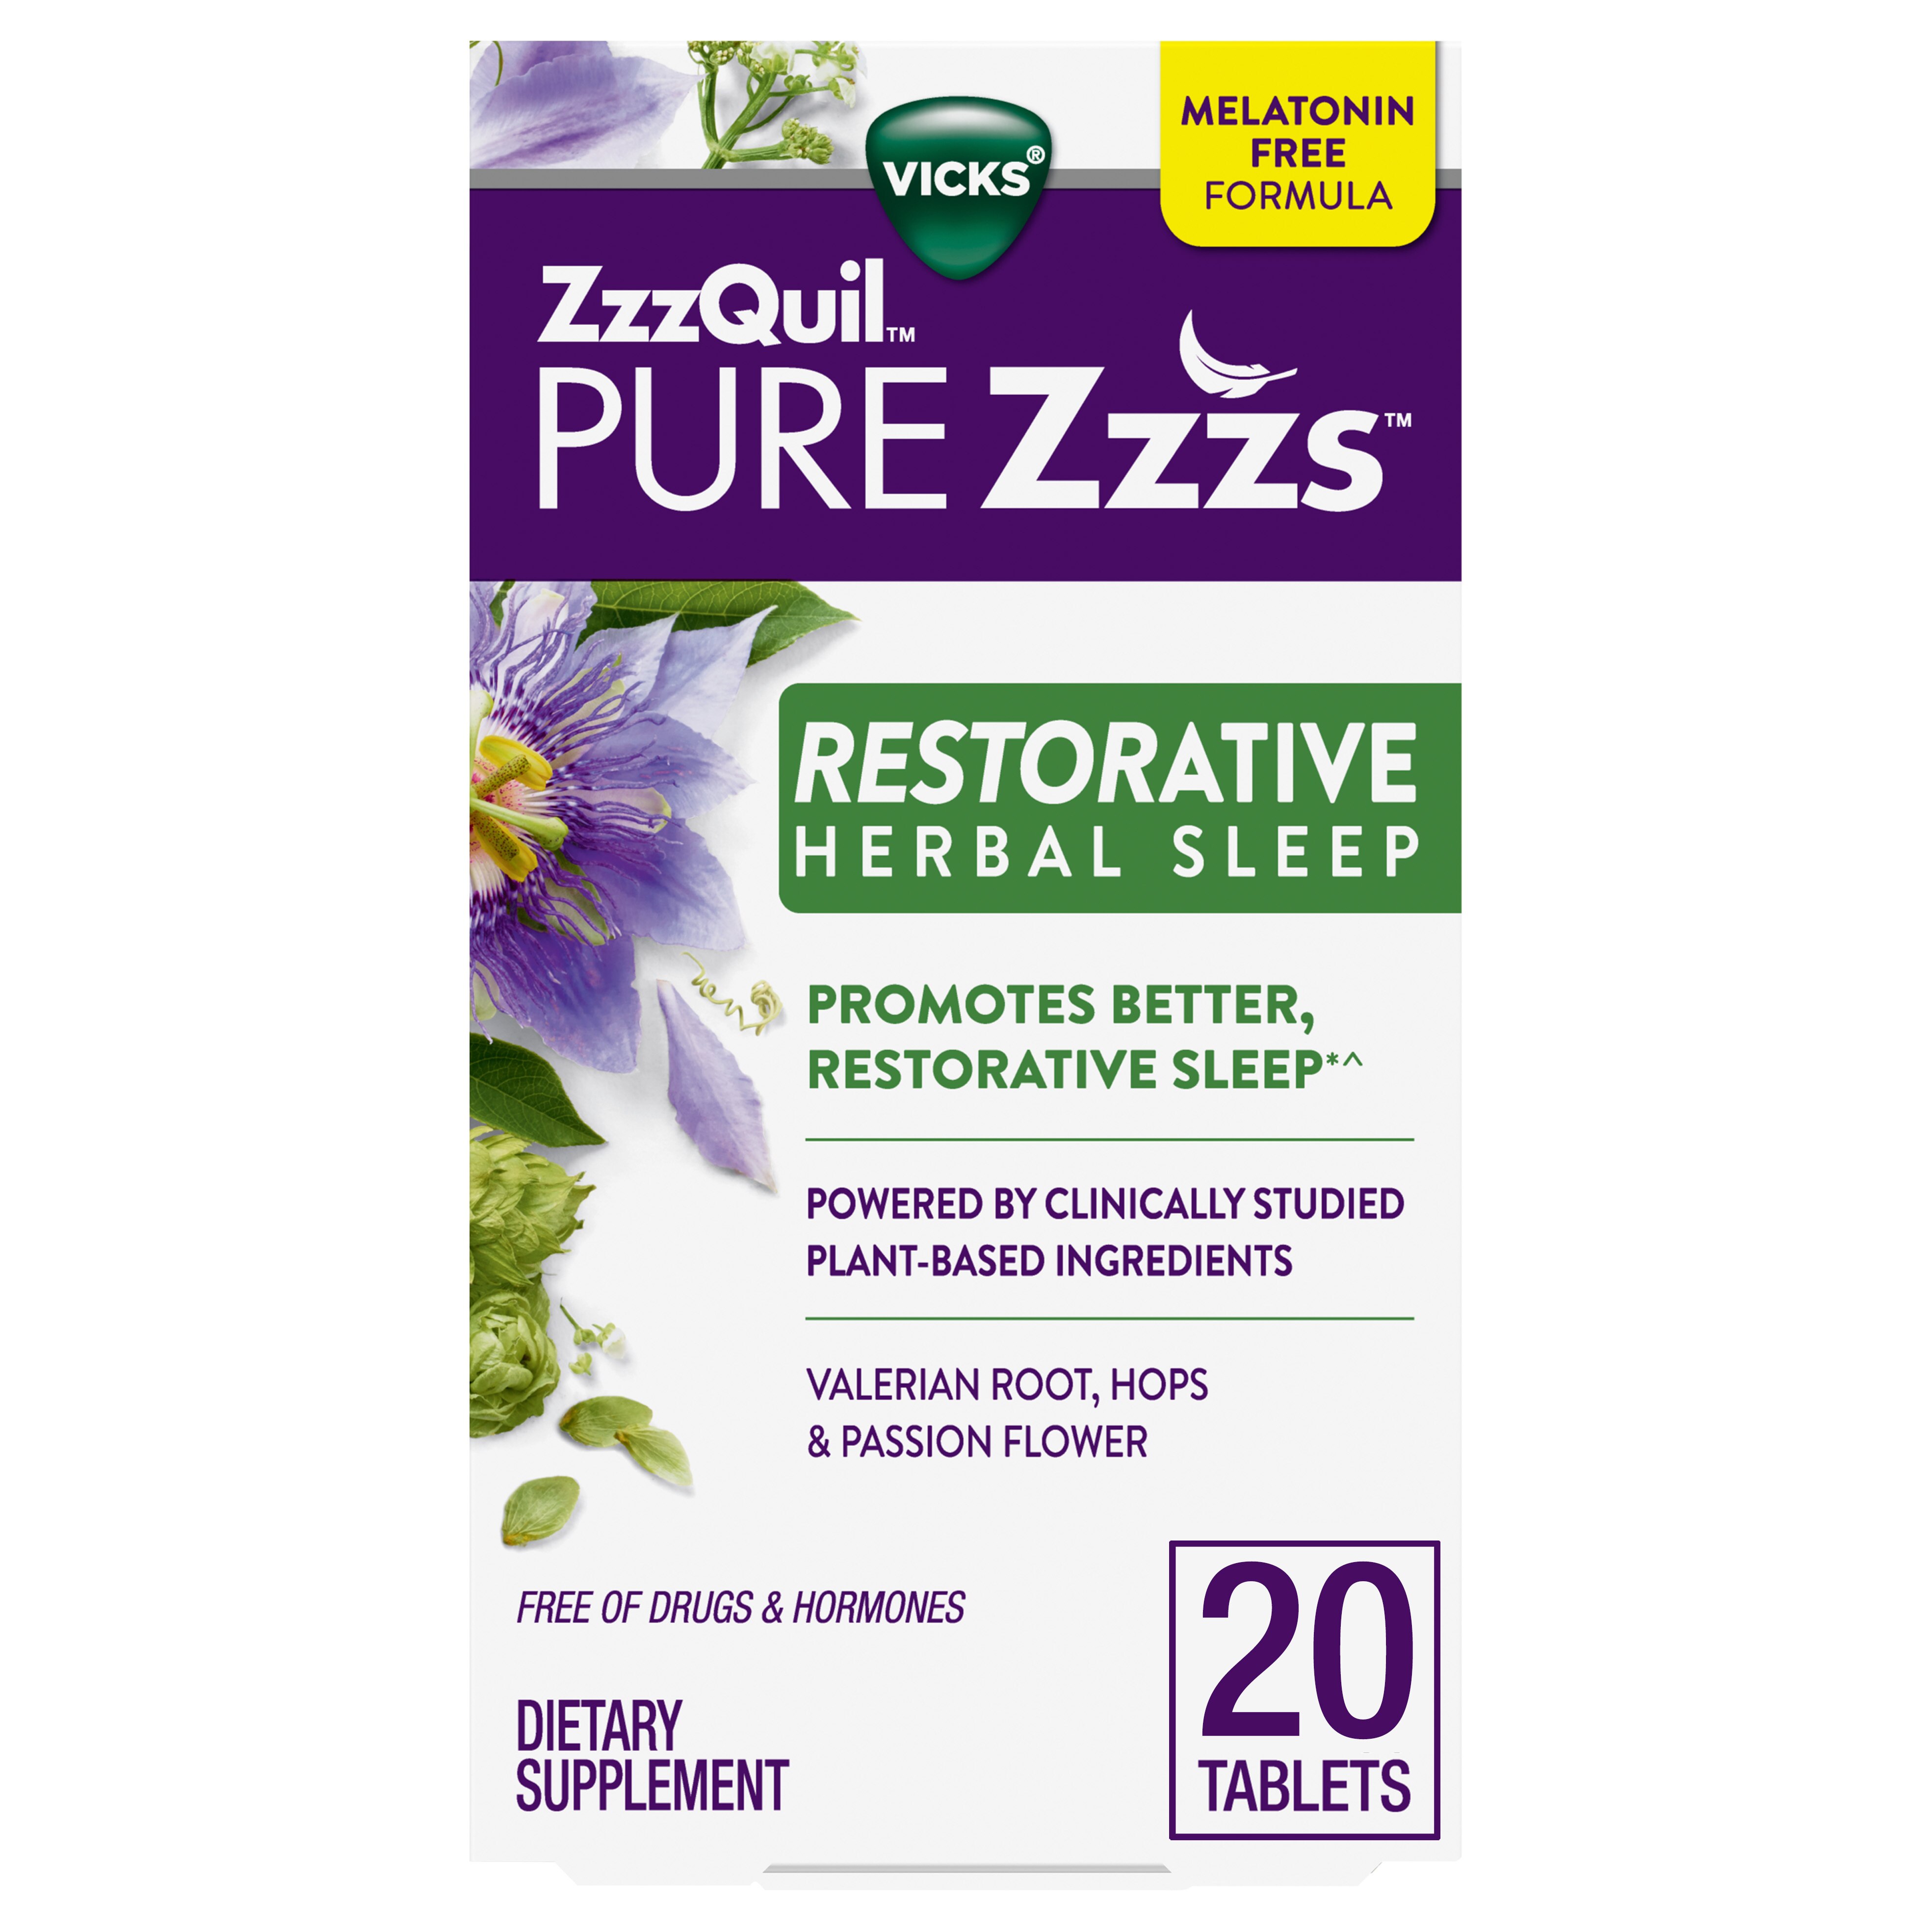 ZzzQuil Pure Zzzs Restorative Herbal Sleep Tablets, 20 Ct , CVS